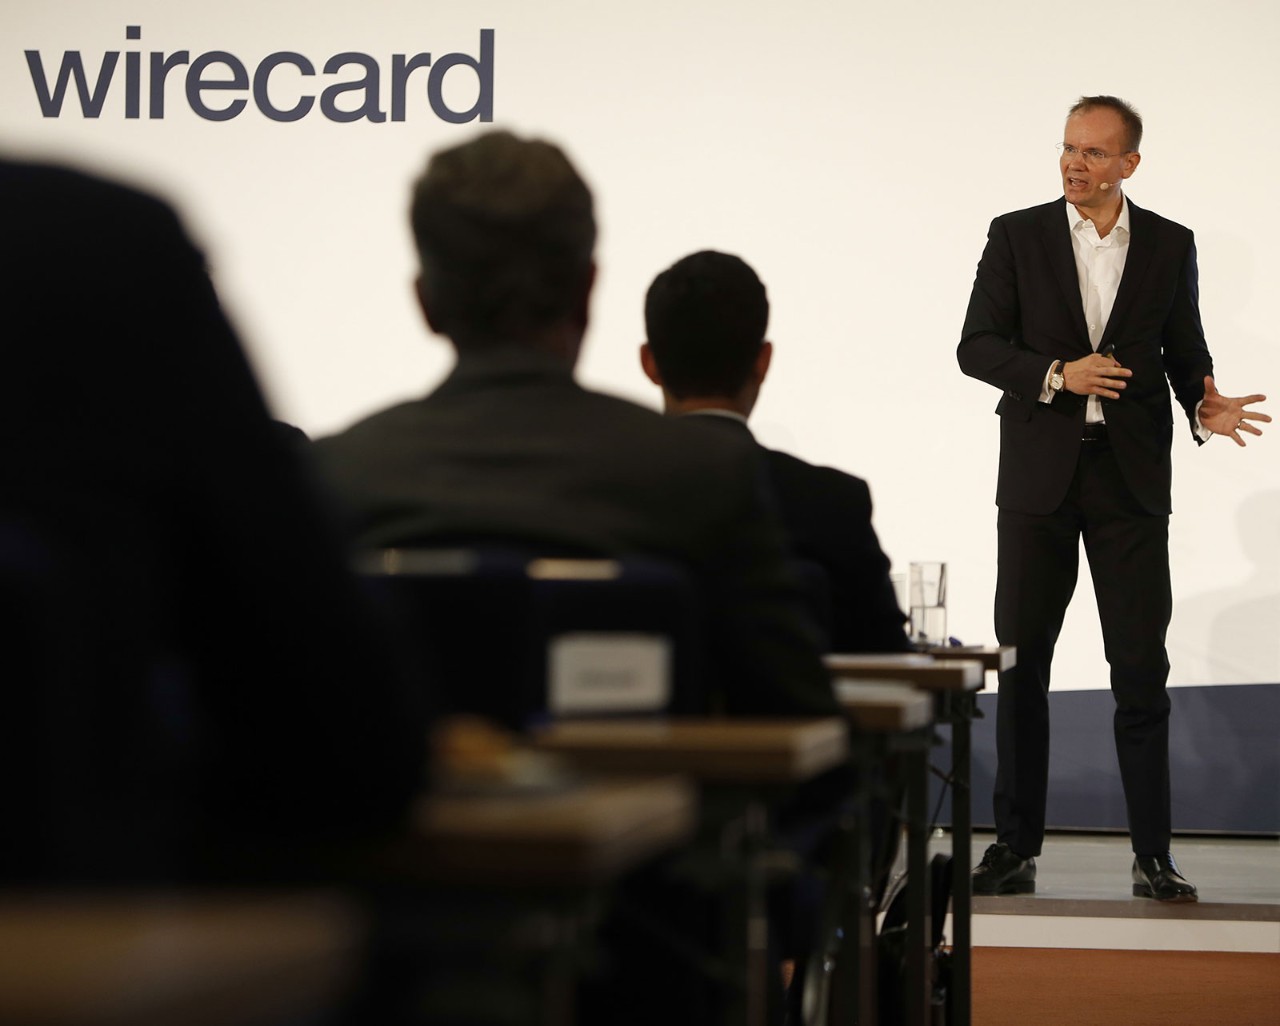 Markus Braun, former CEO of Wirecard AG, speaks during the company's annual news conference in Munich, Germany, 25 April 2019.